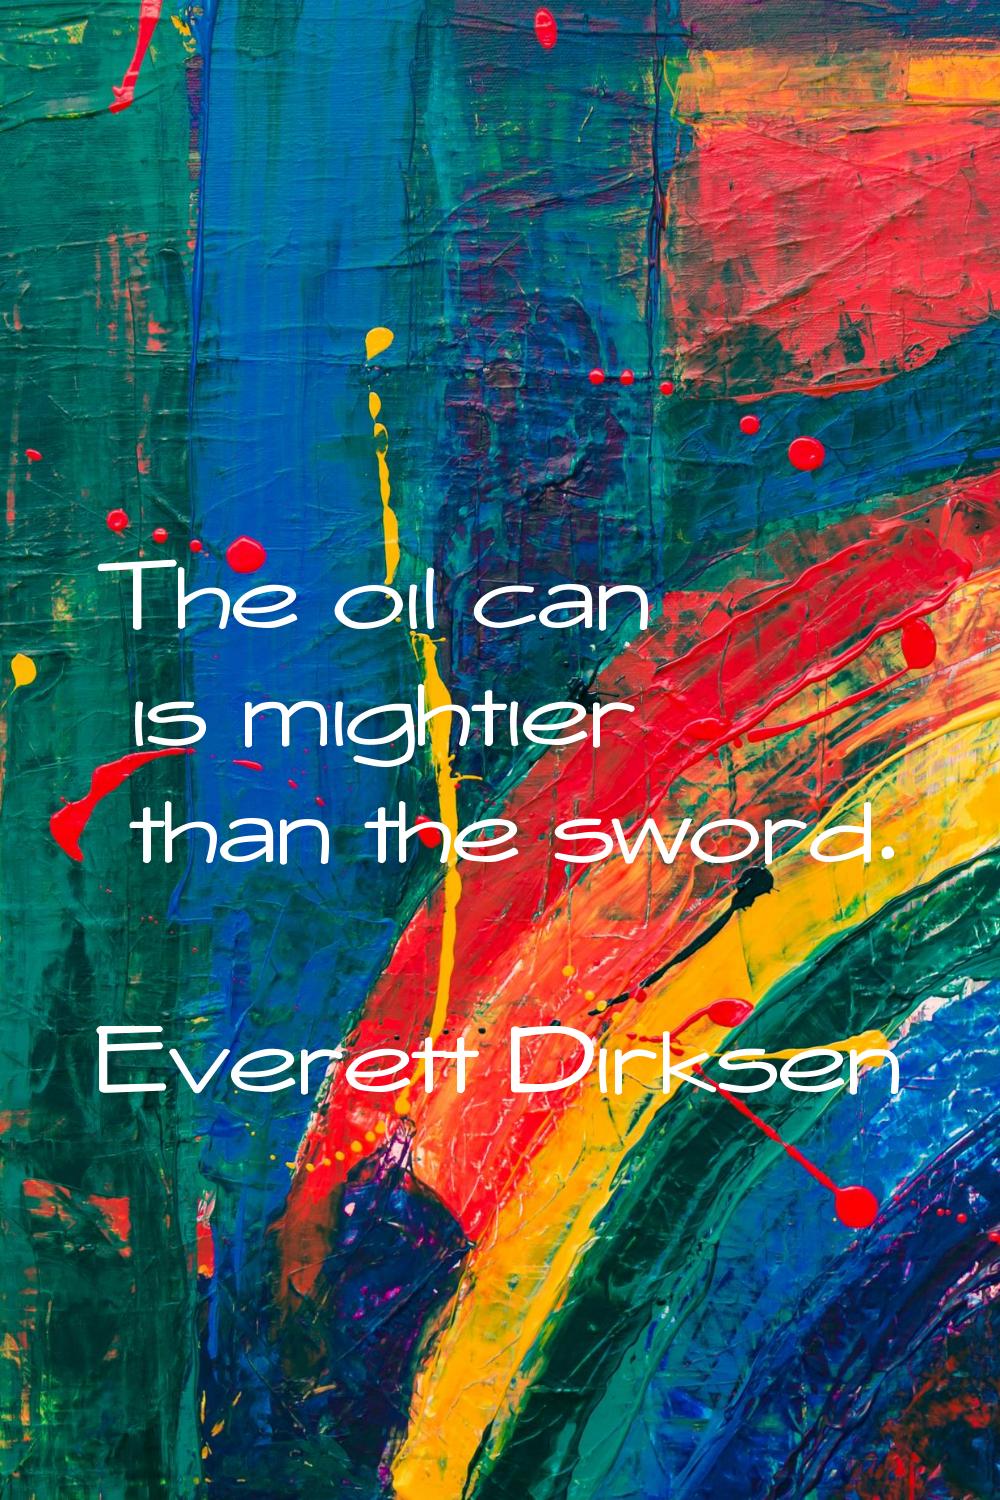 The oil can is mightier than the sword.